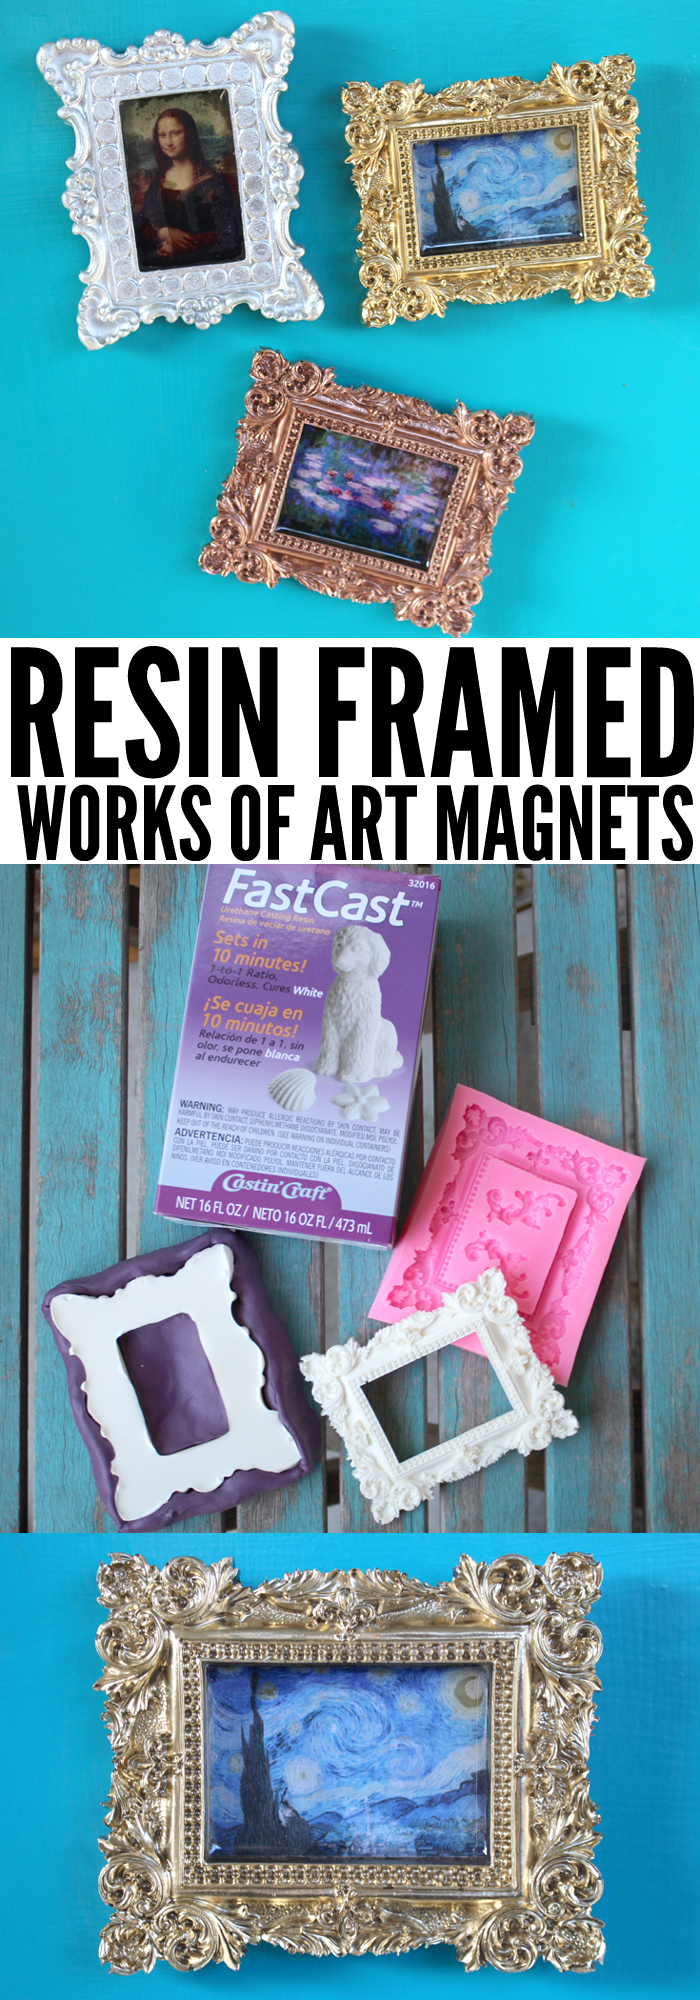 Create a mini museum with ornate frames and works of art using resin!  These magnets are perfect for the fridge, school locker or miniature dollhouse!   via @resincraftsblog